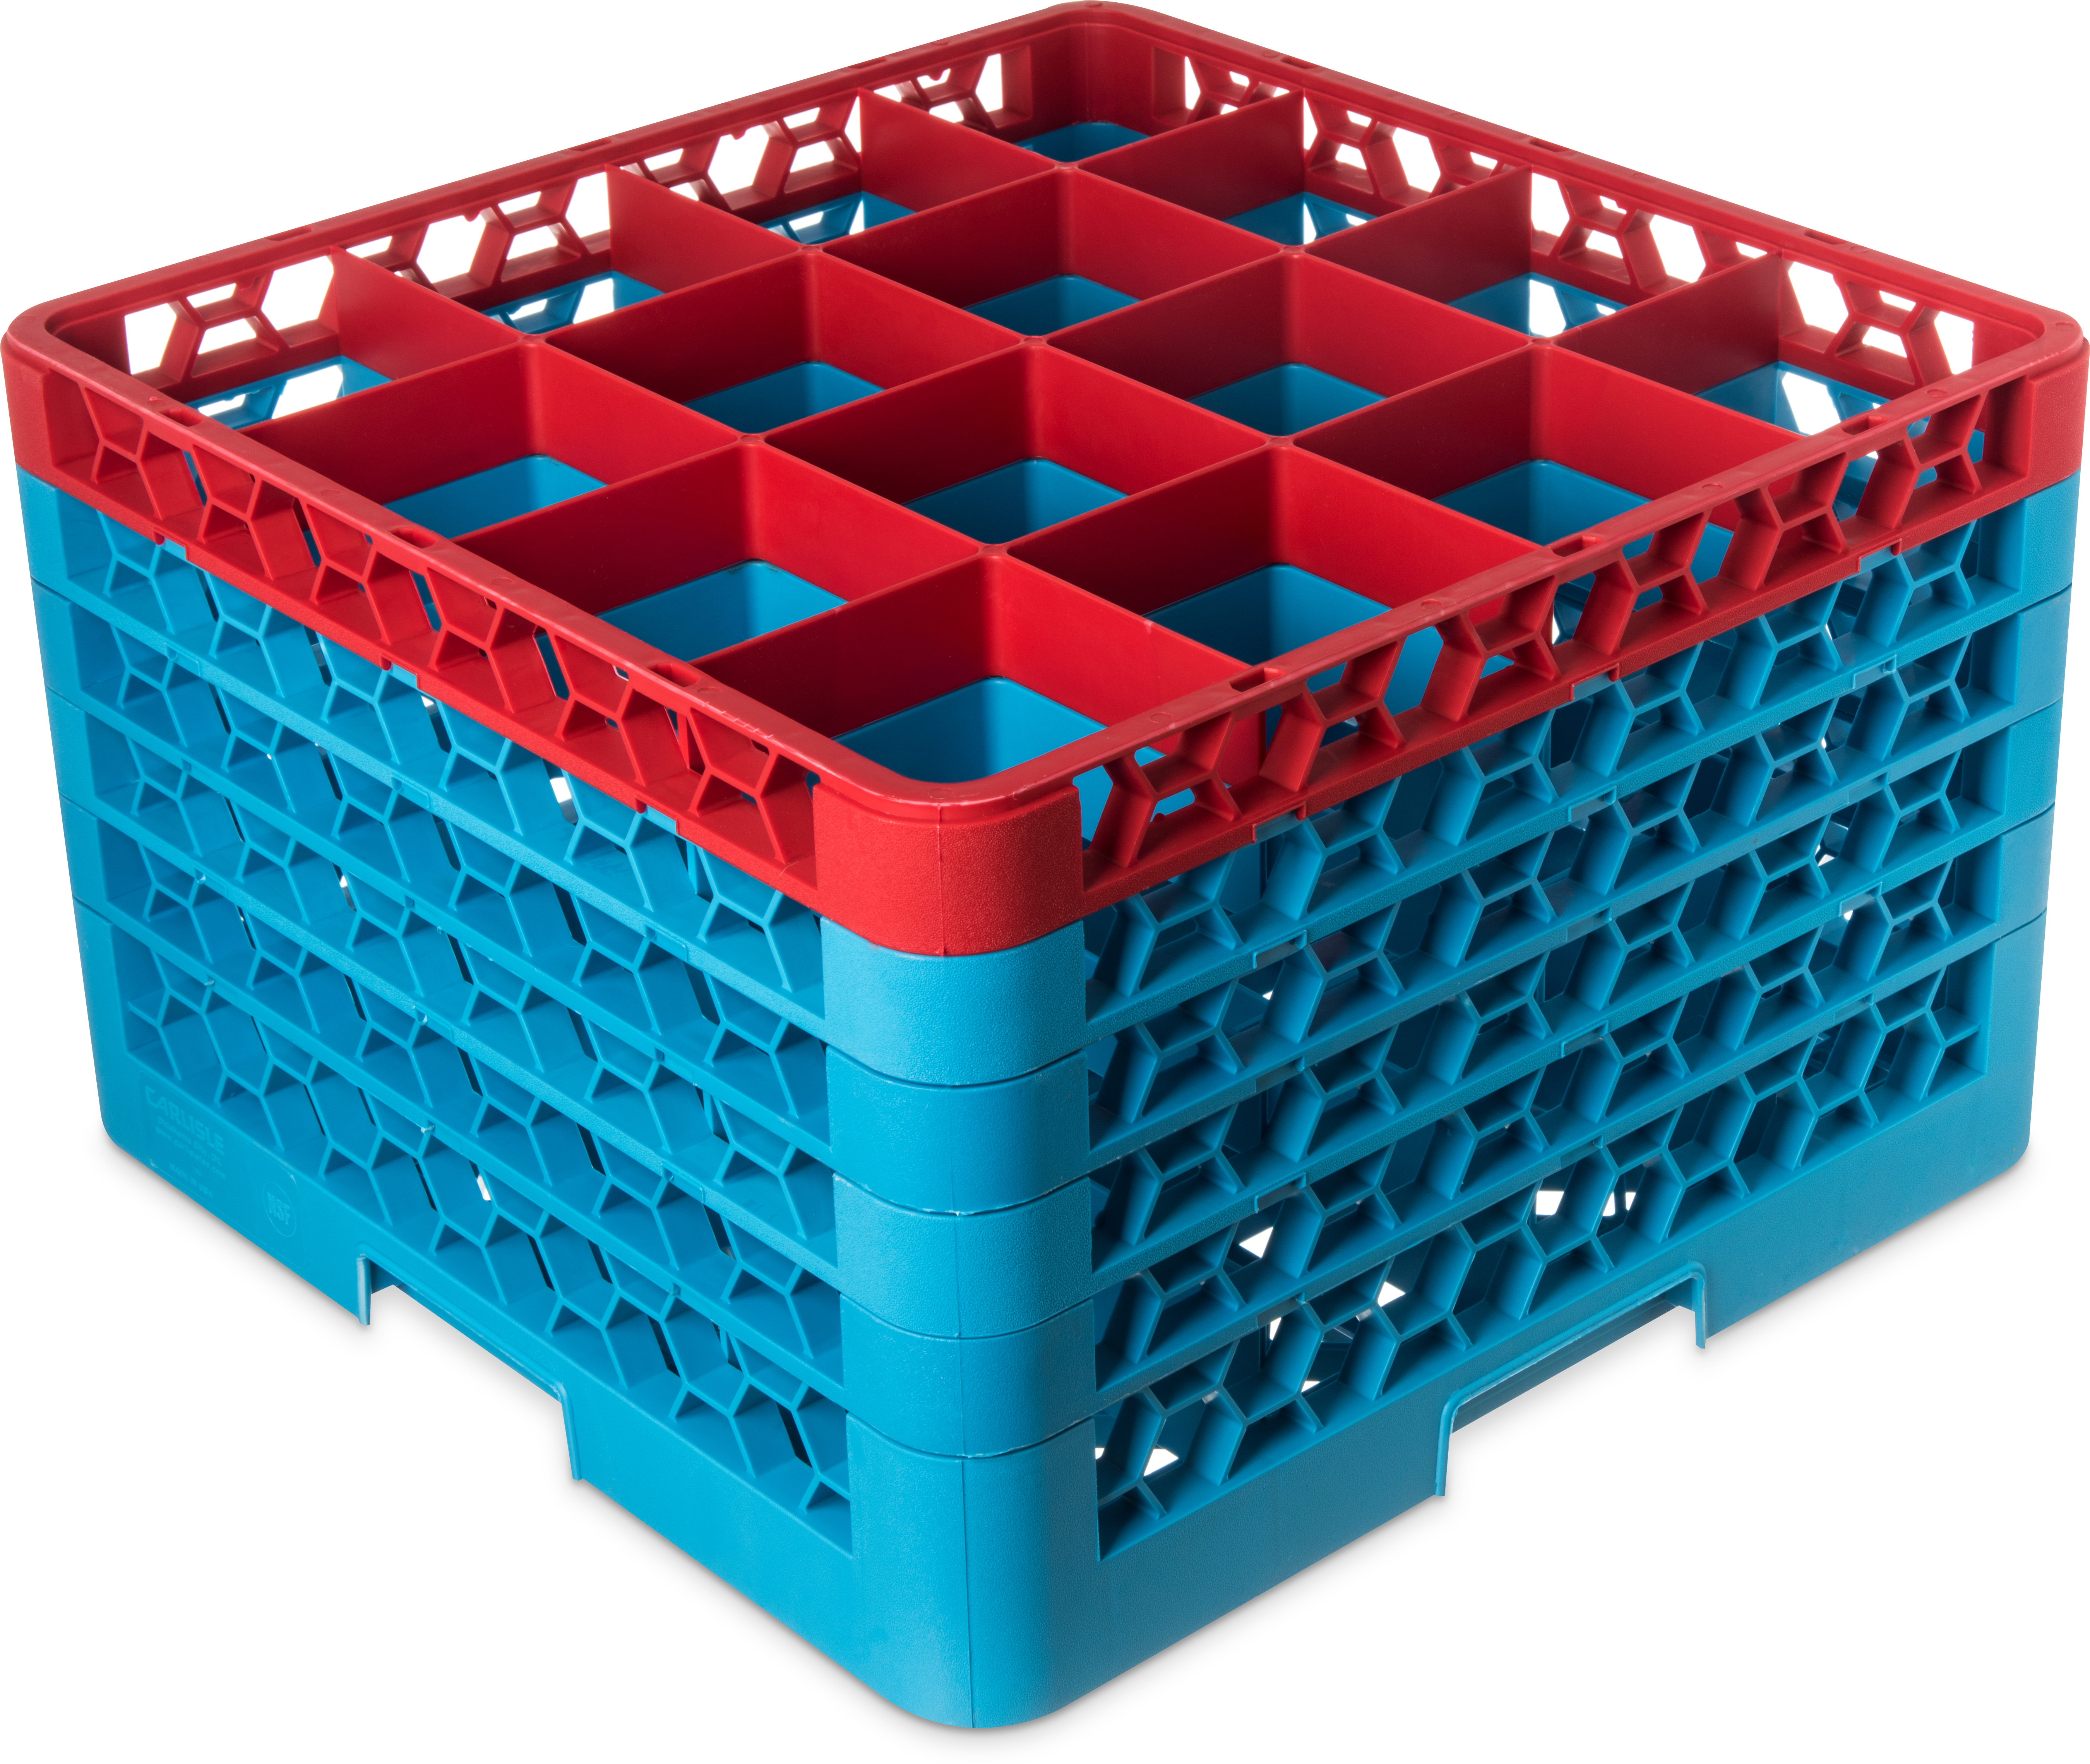 OptiClean 16 Compartment Glass Rack with 5 Extenders 11.9 - Red-Carlisle Blue